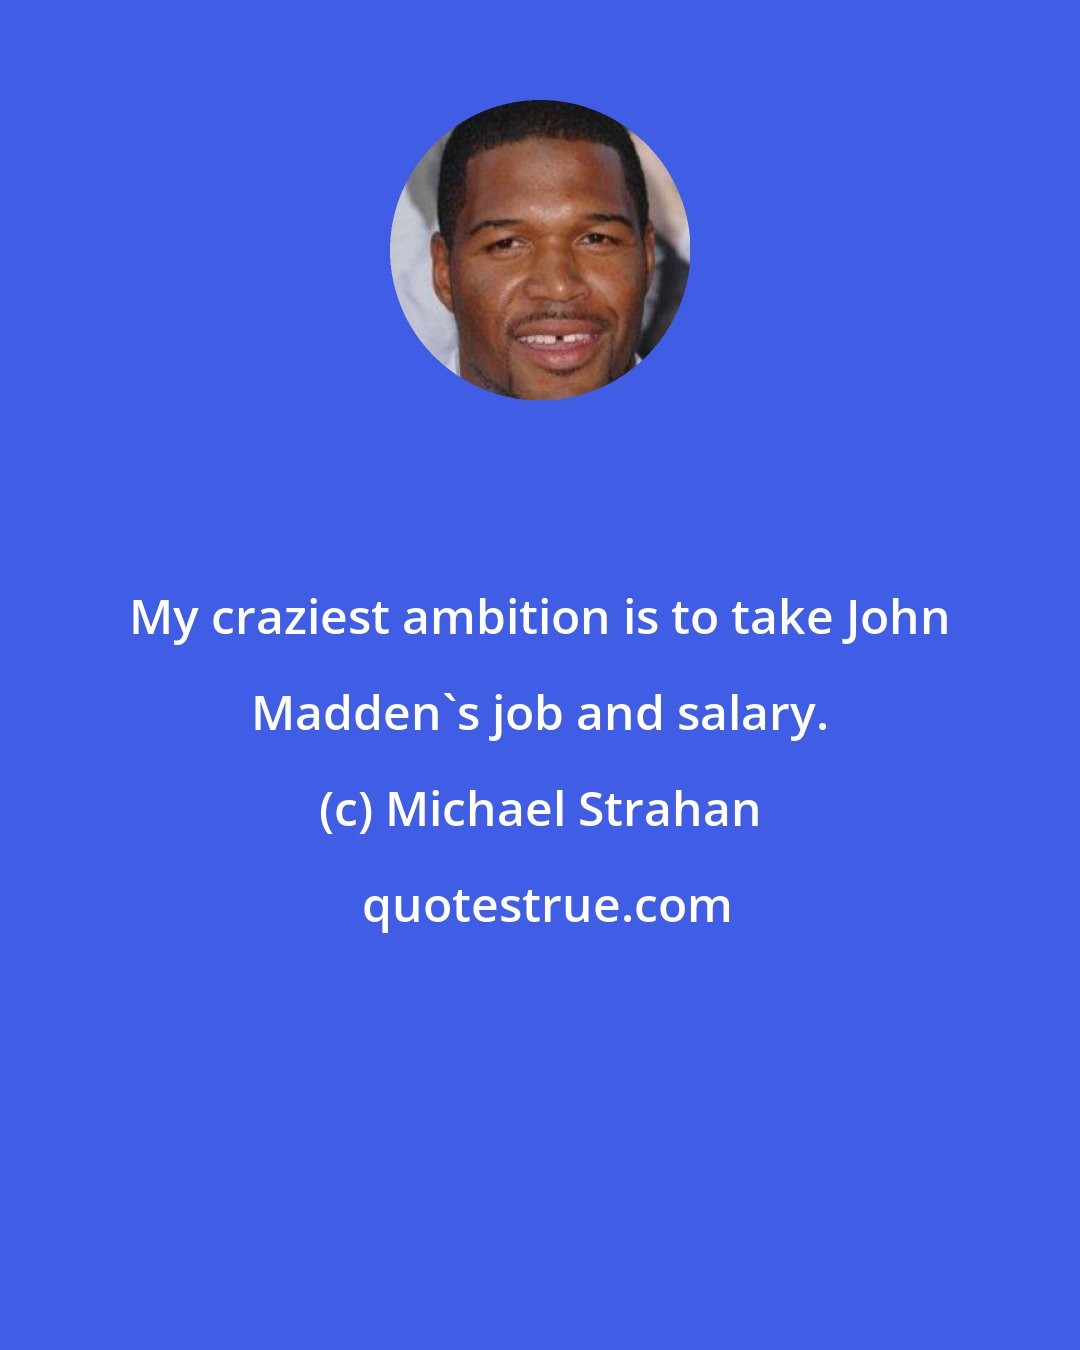 Michael Strahan: My craziest ambition is to take John Madden's job and salary.